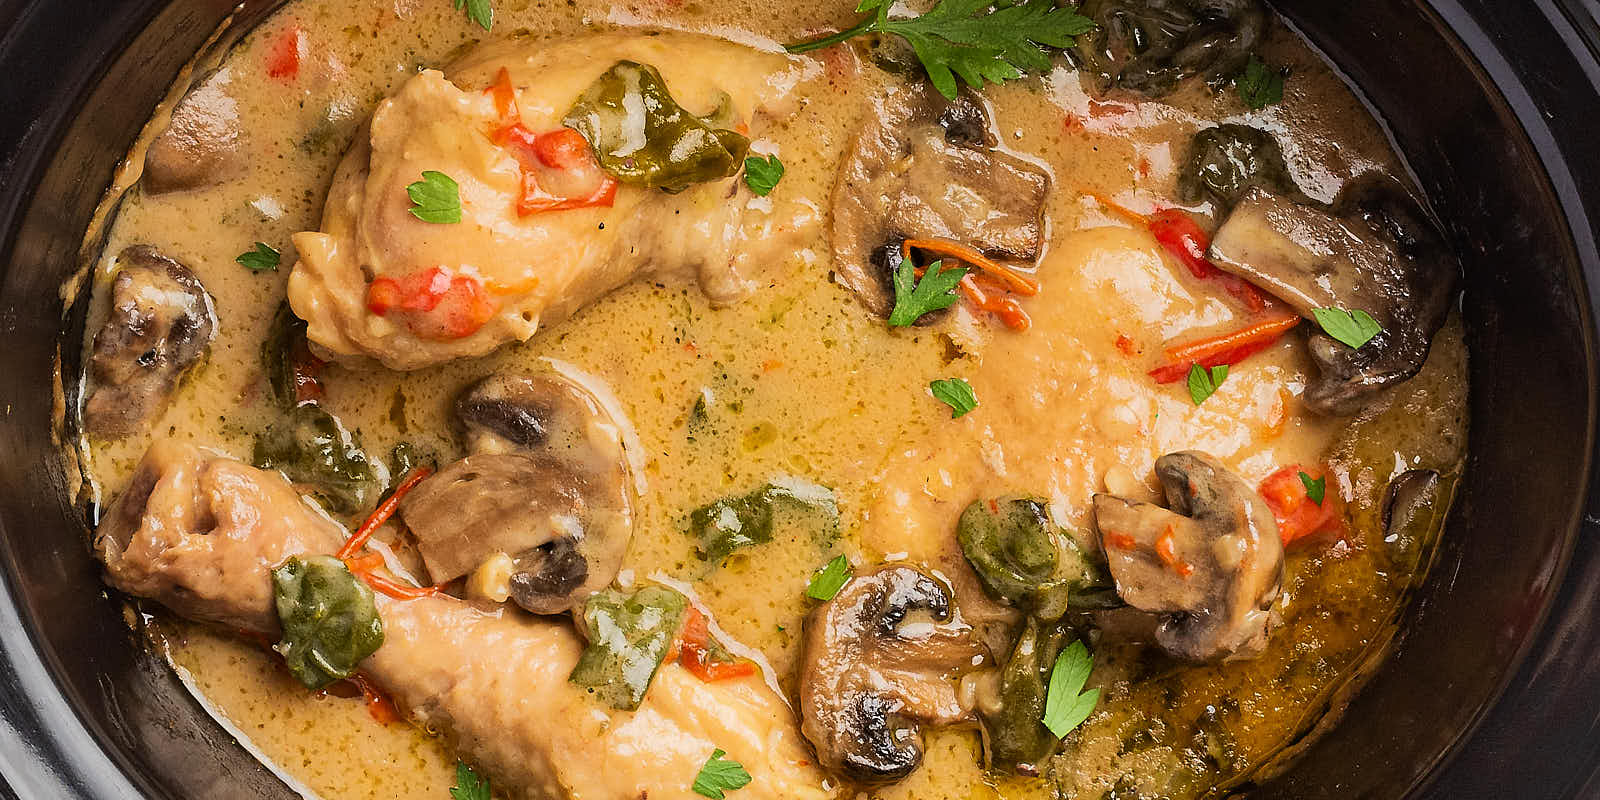 Easy Slow Cooker Creamy Chicken and Mushrooms Recipe